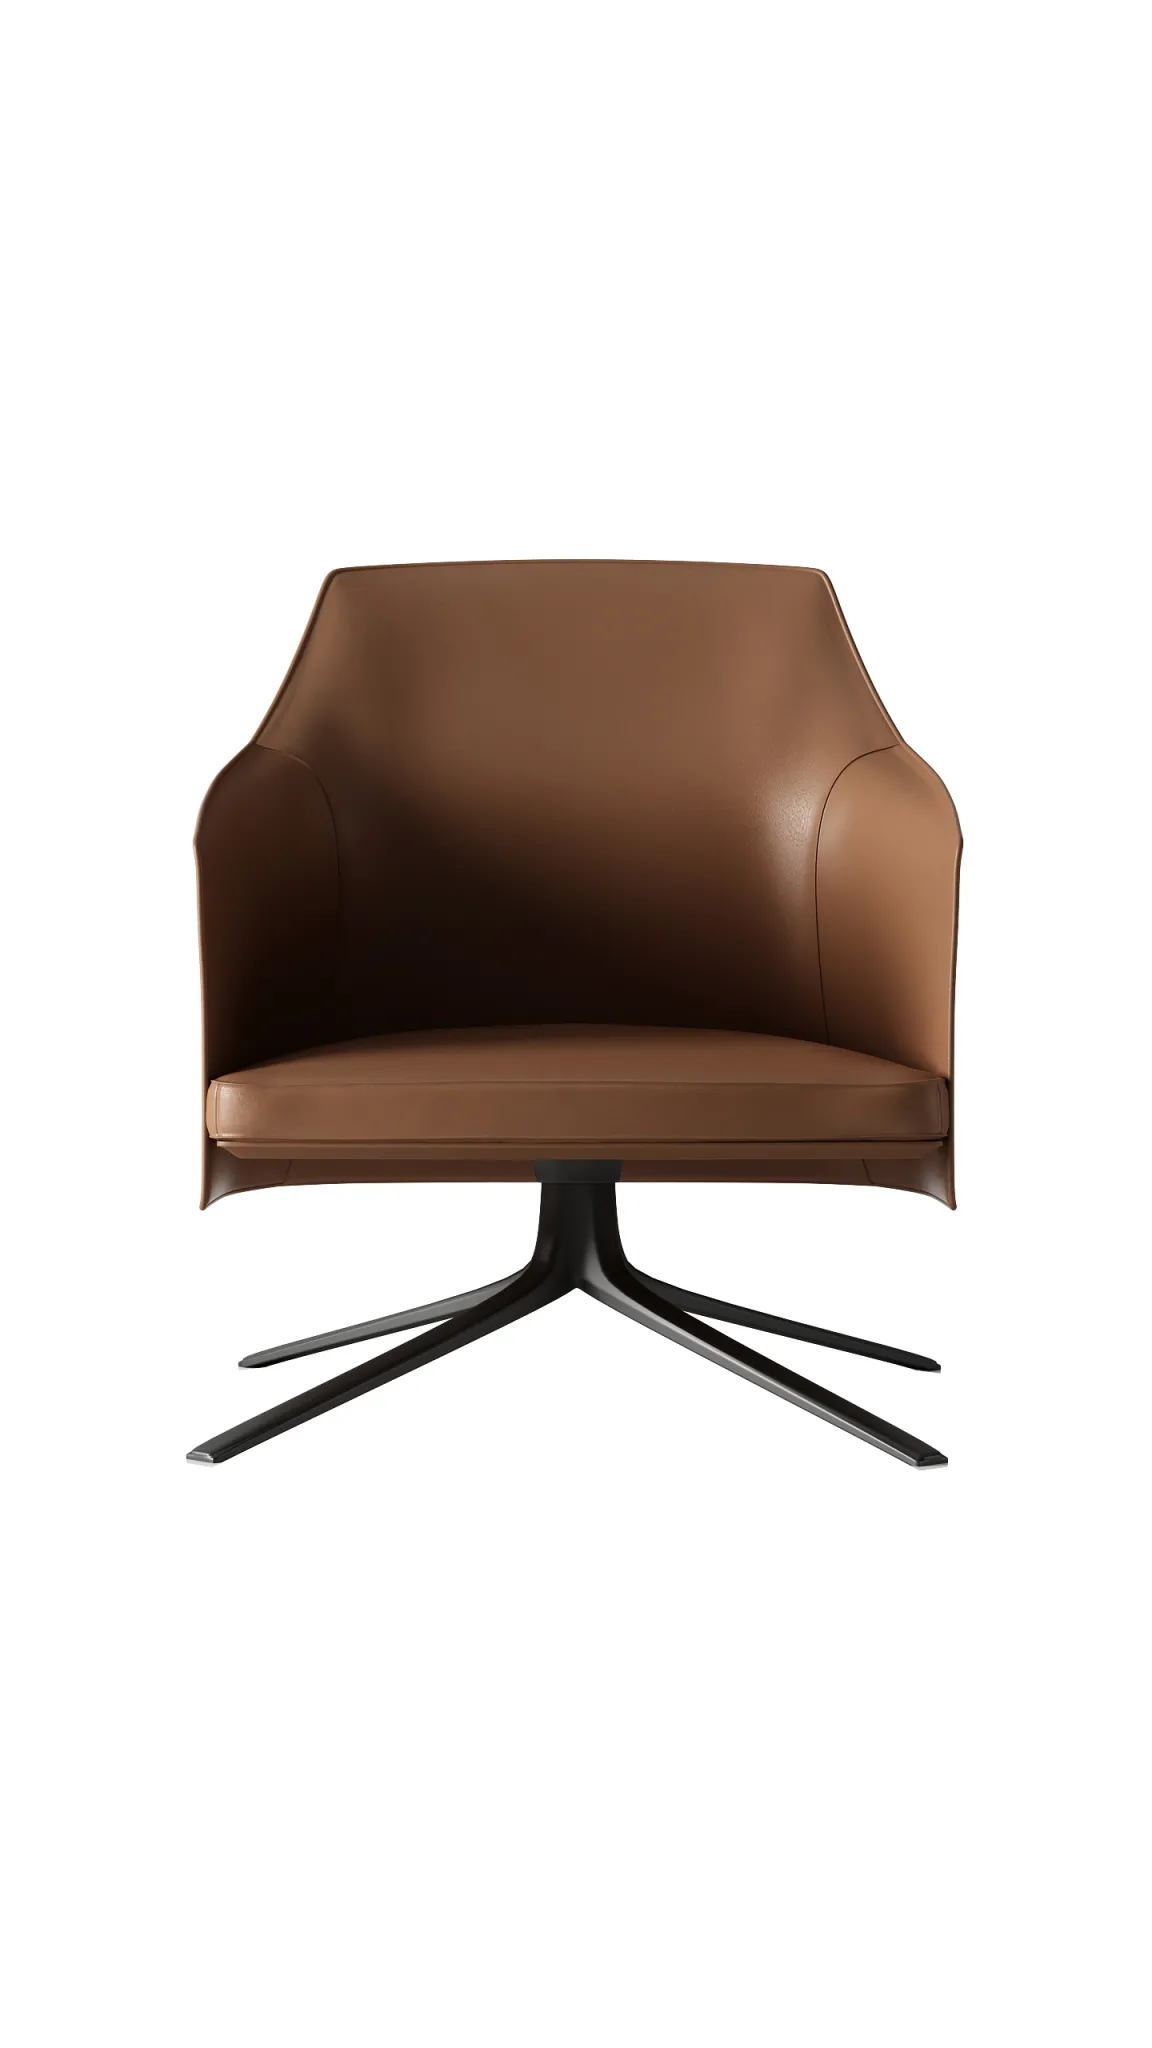 FURNITURE 3D MODELS – CHAIRS – 0287